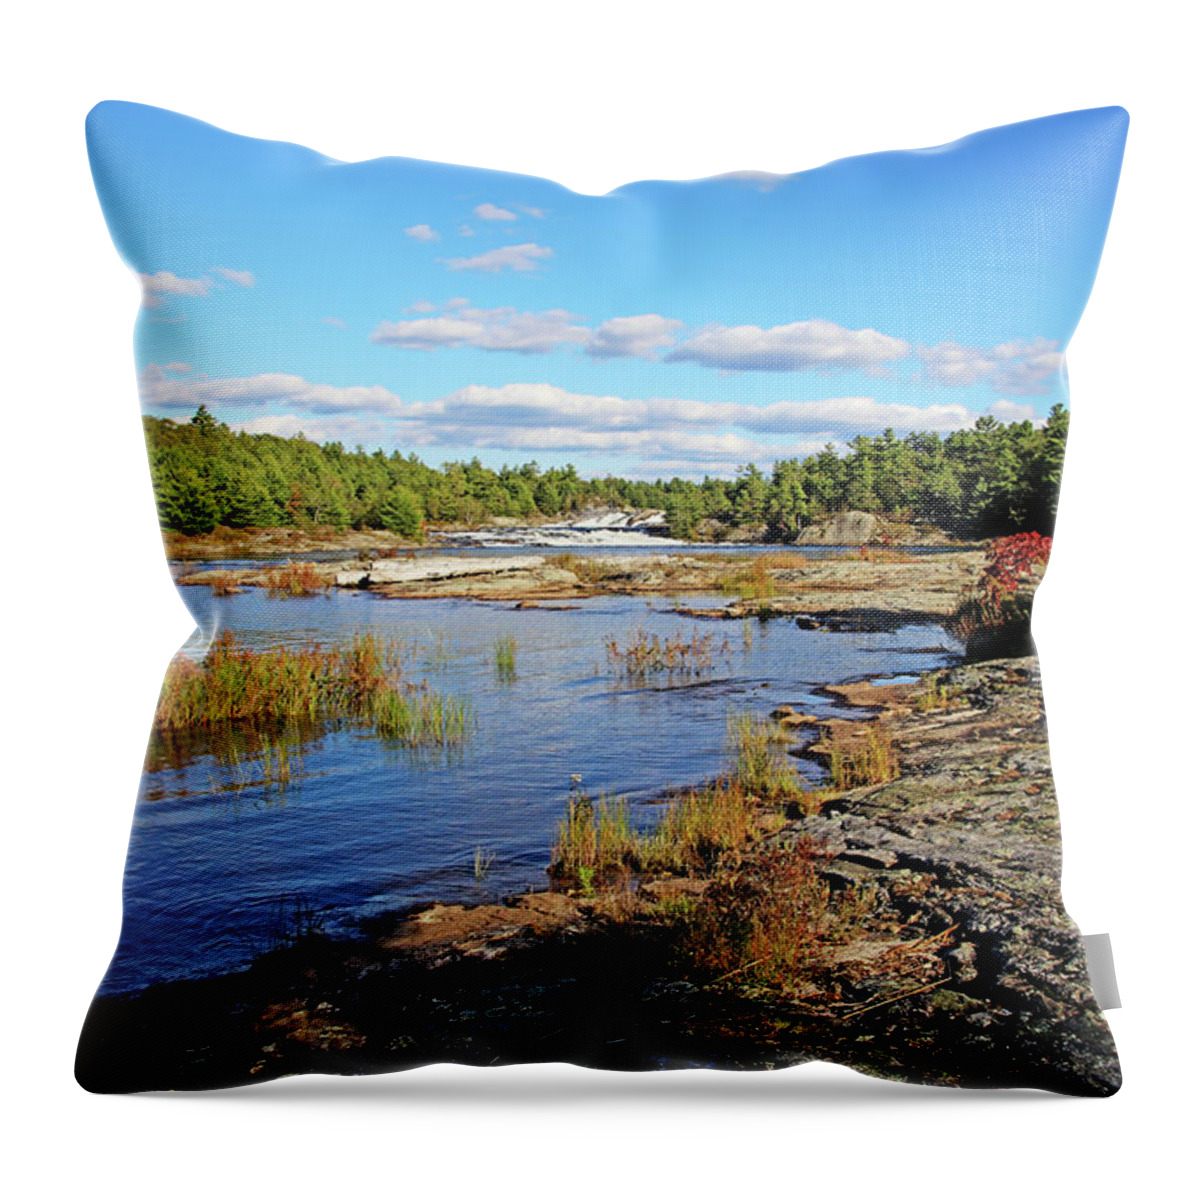 Waterfalls Throw Pillow featuring the photograph Moon River At The Falls IV by Debbie Oppermann